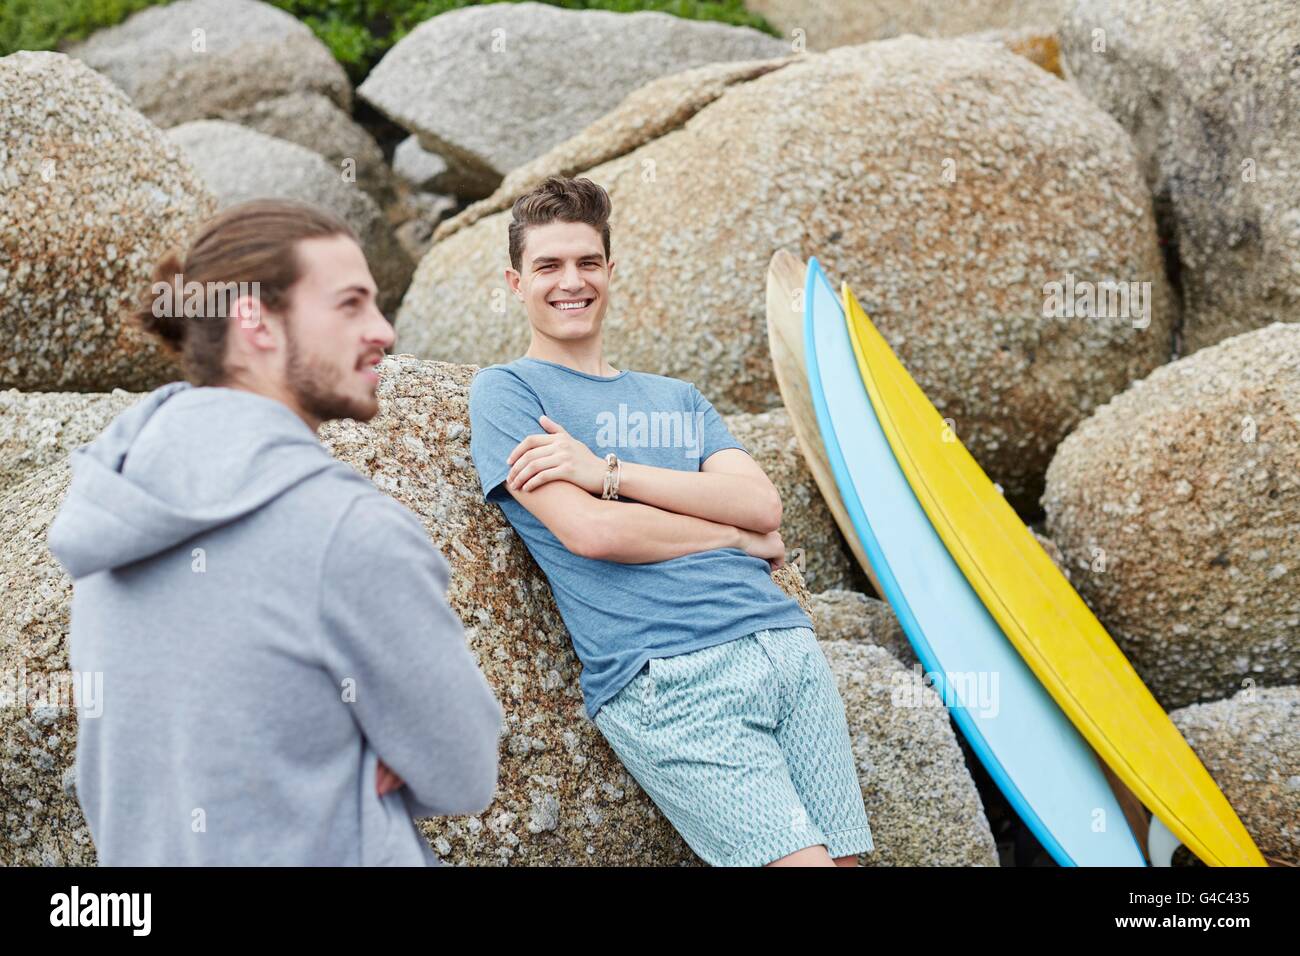 MODEL RELEASED. Young man leaning on rocks with surfboard. Stock Photo